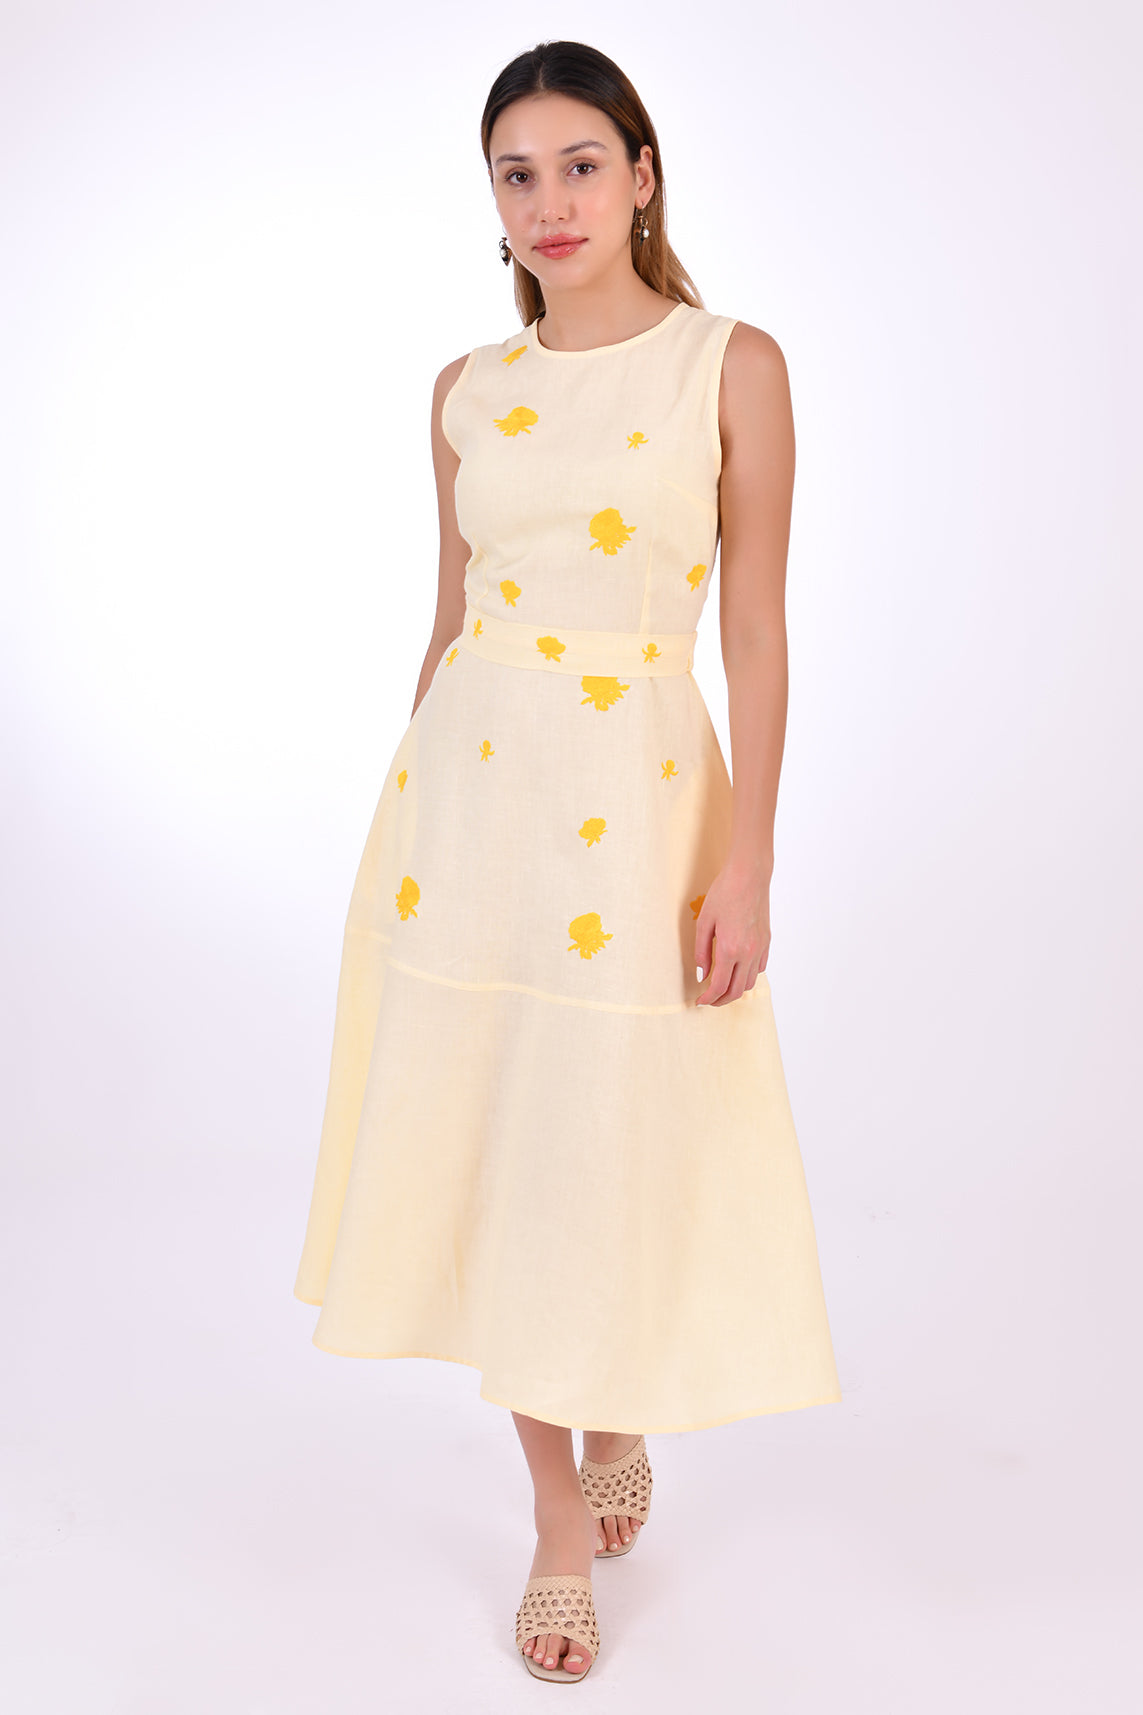 Fanm Mon Midi Linen Elvan Dress.  This beautiful A-line silhouette is crafted in breathable linen and features stunning front and back embroidery, side pockets, and a classic belted waist.  Front View.